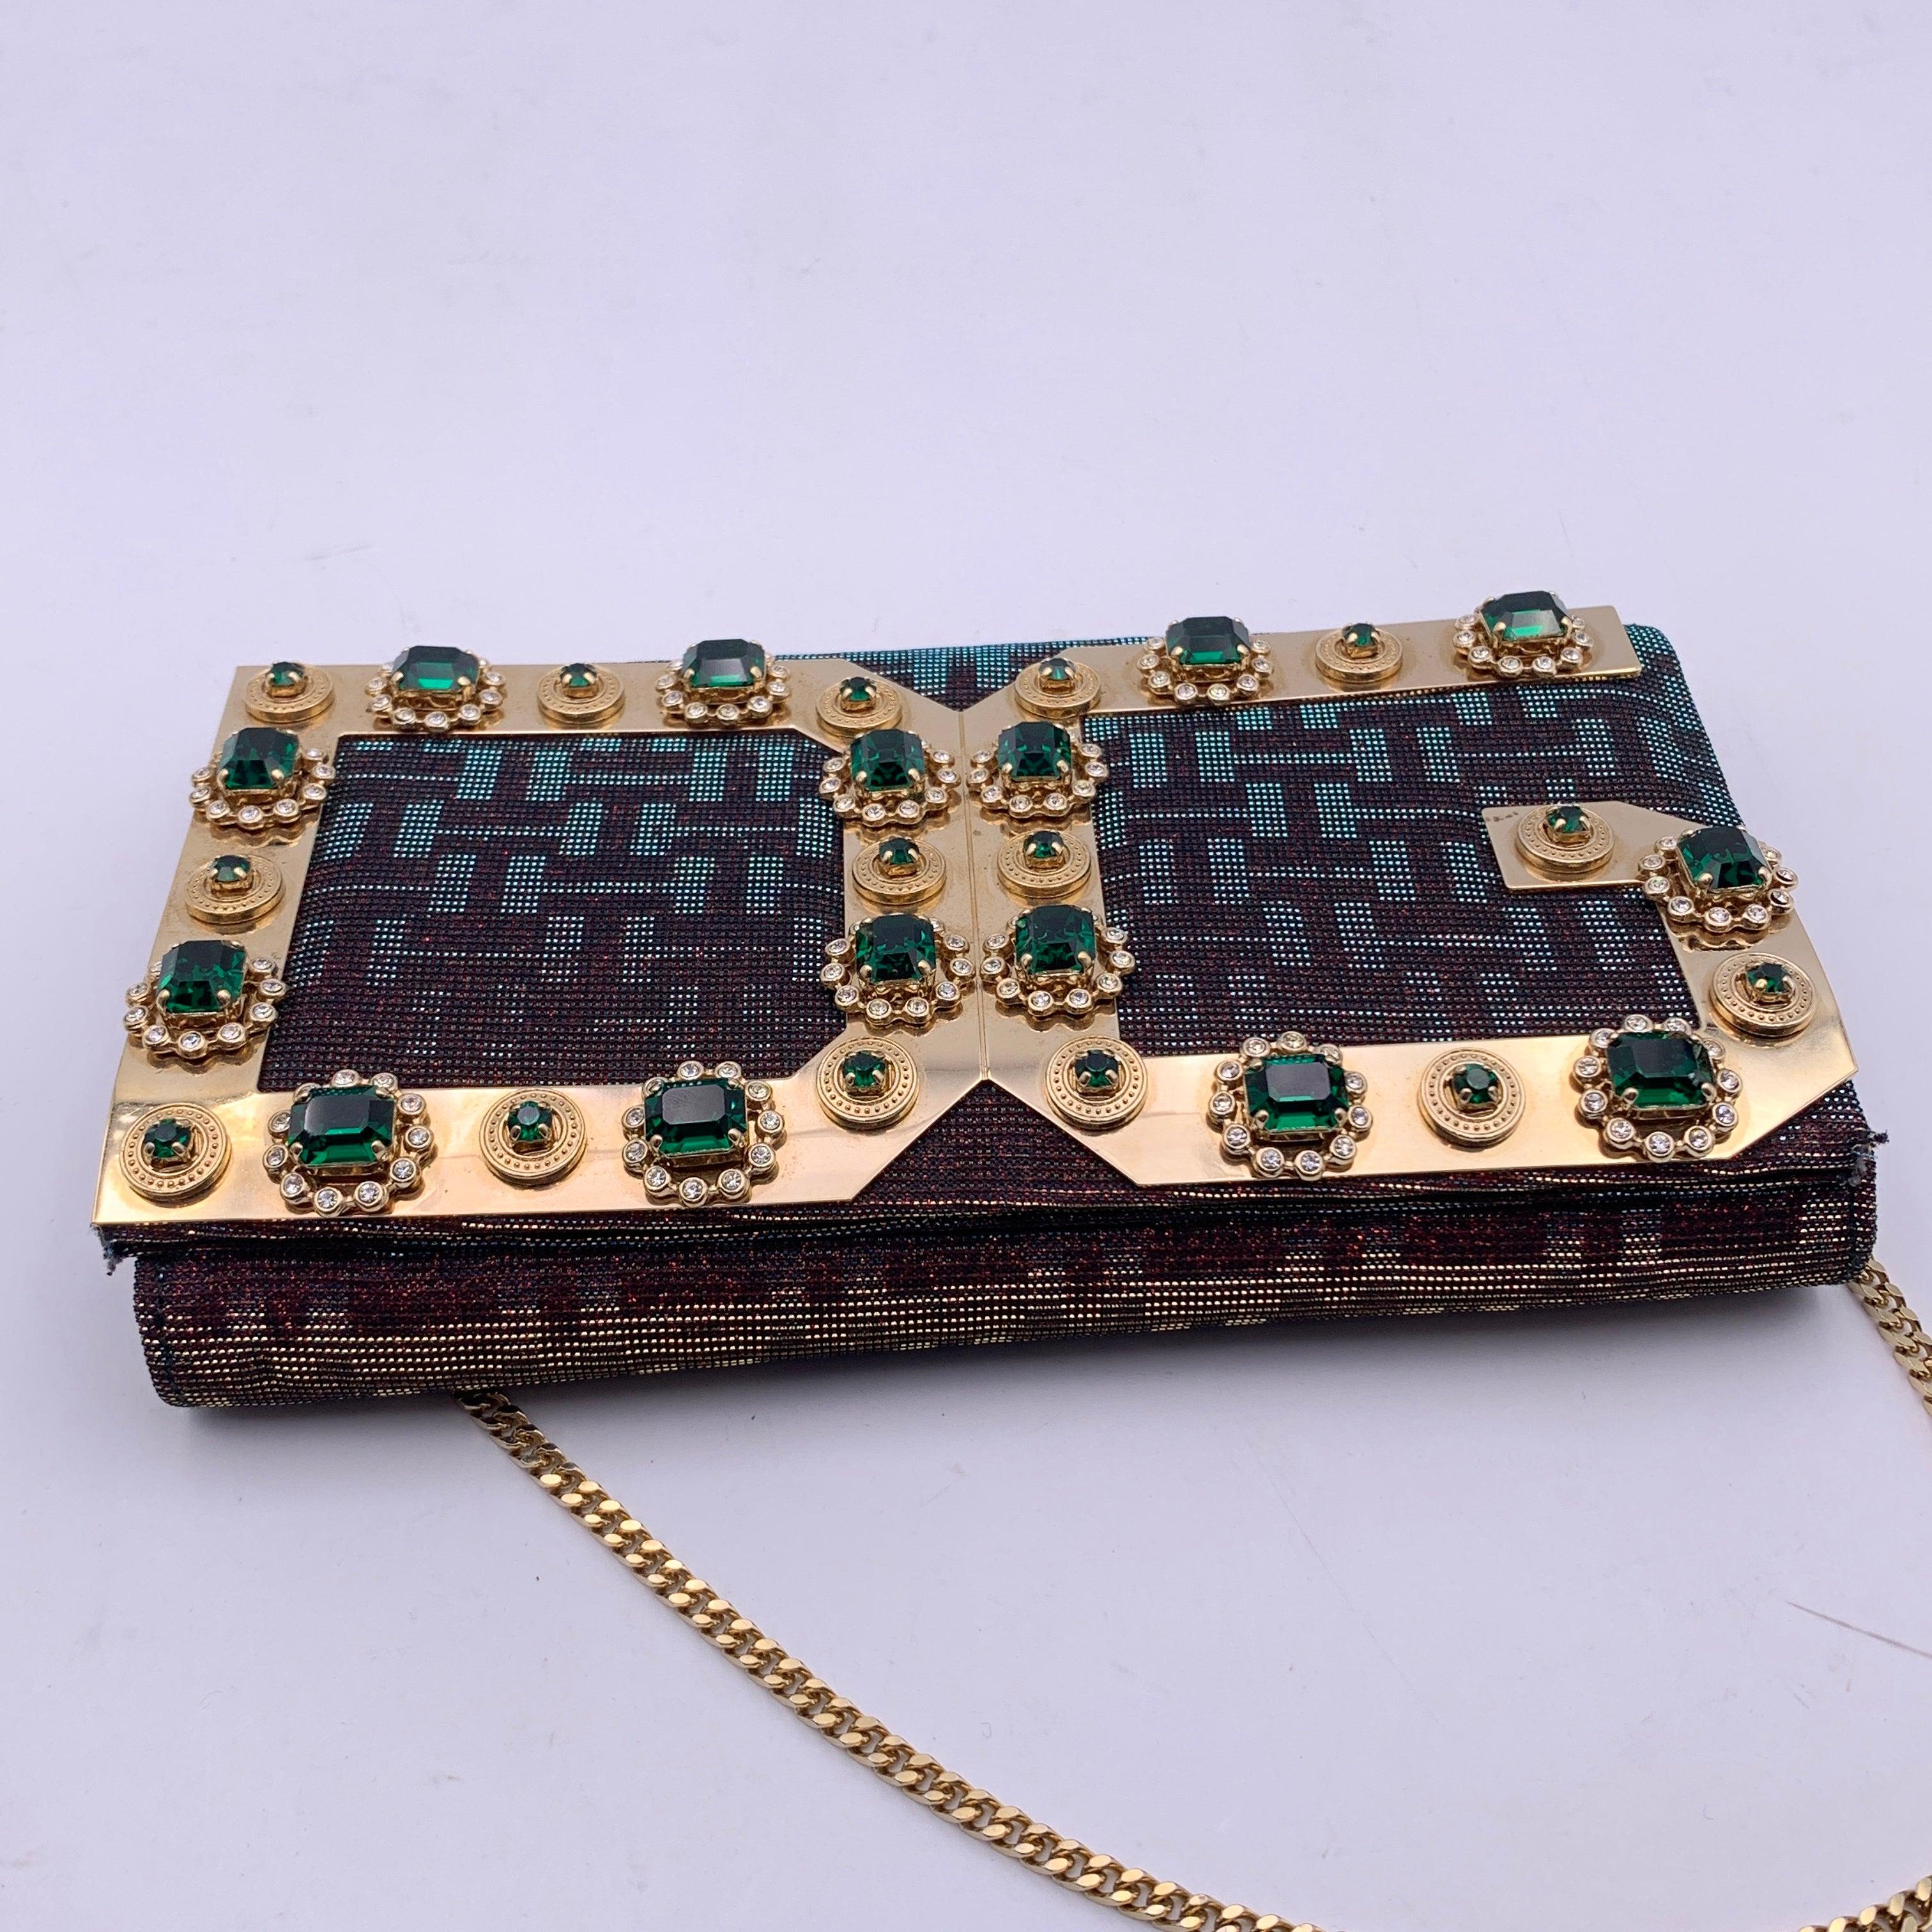 Women's Dolce & Gabbana Embellished Evening Bag Clutch with Chain Strap